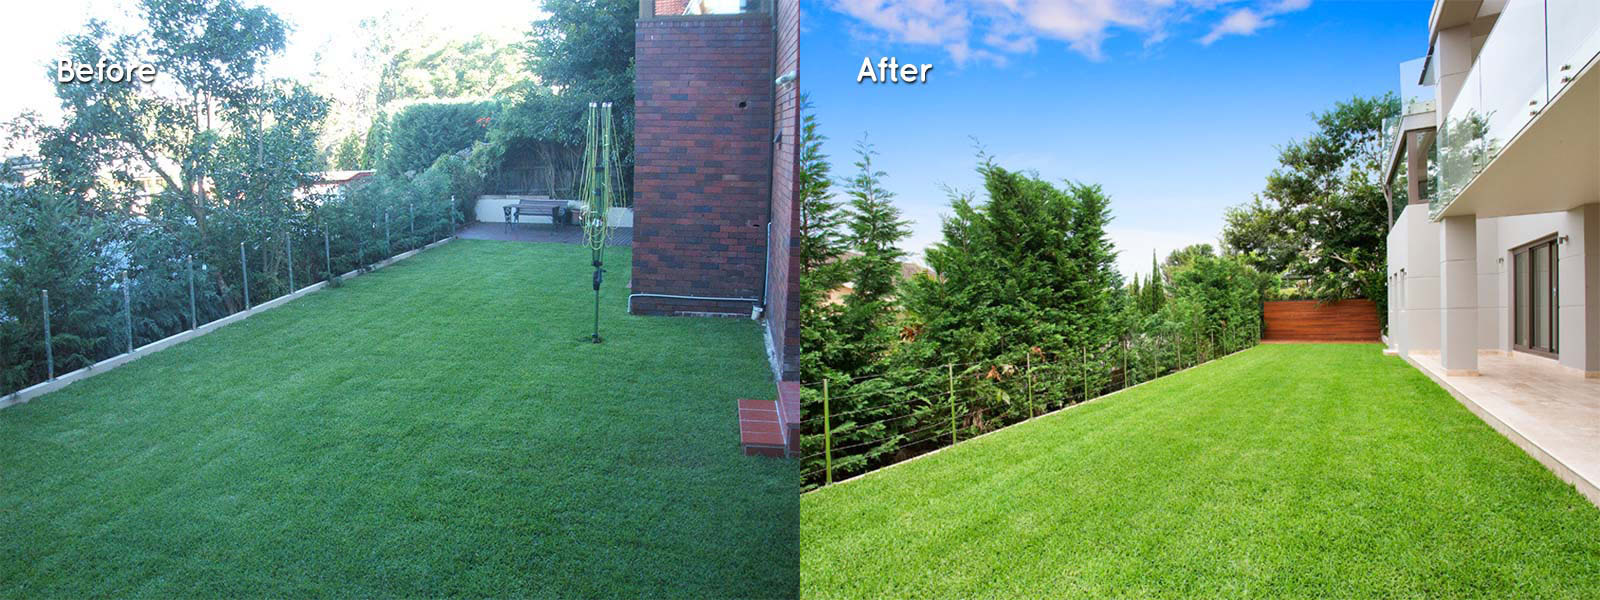 before-and-after-home-renovation-sydney-backyard